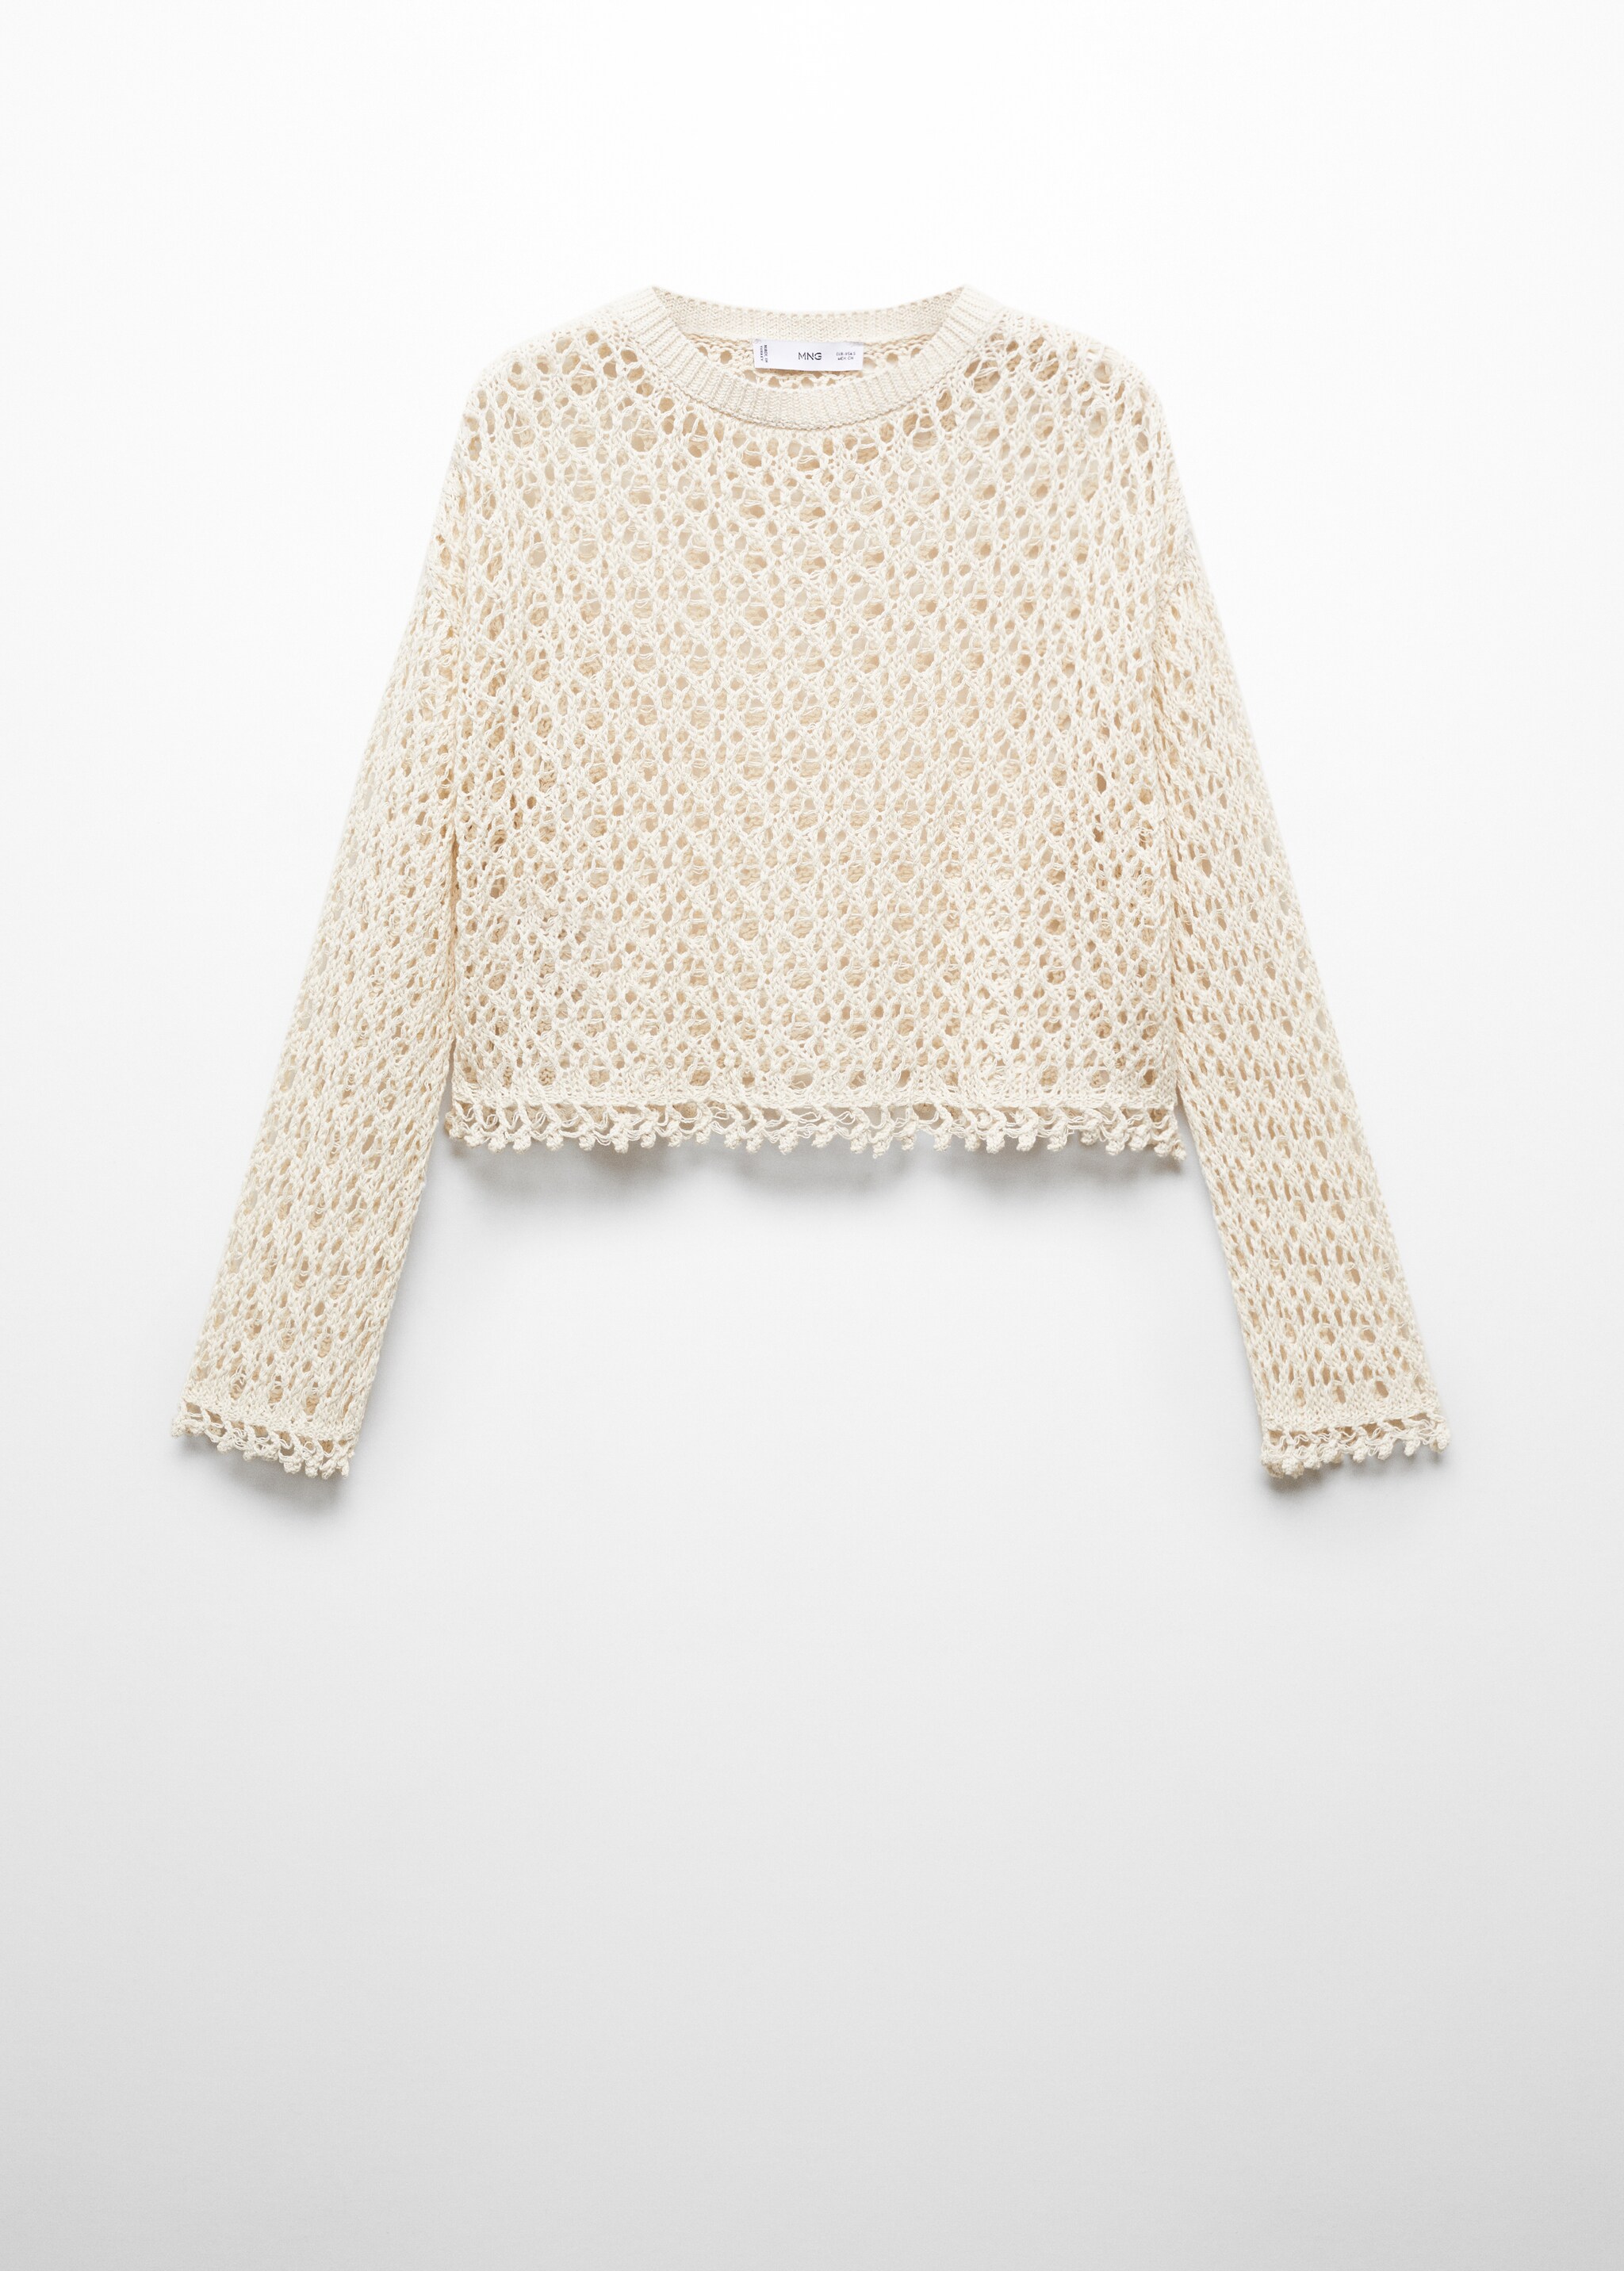 Cotton crochet sweater - Article without model